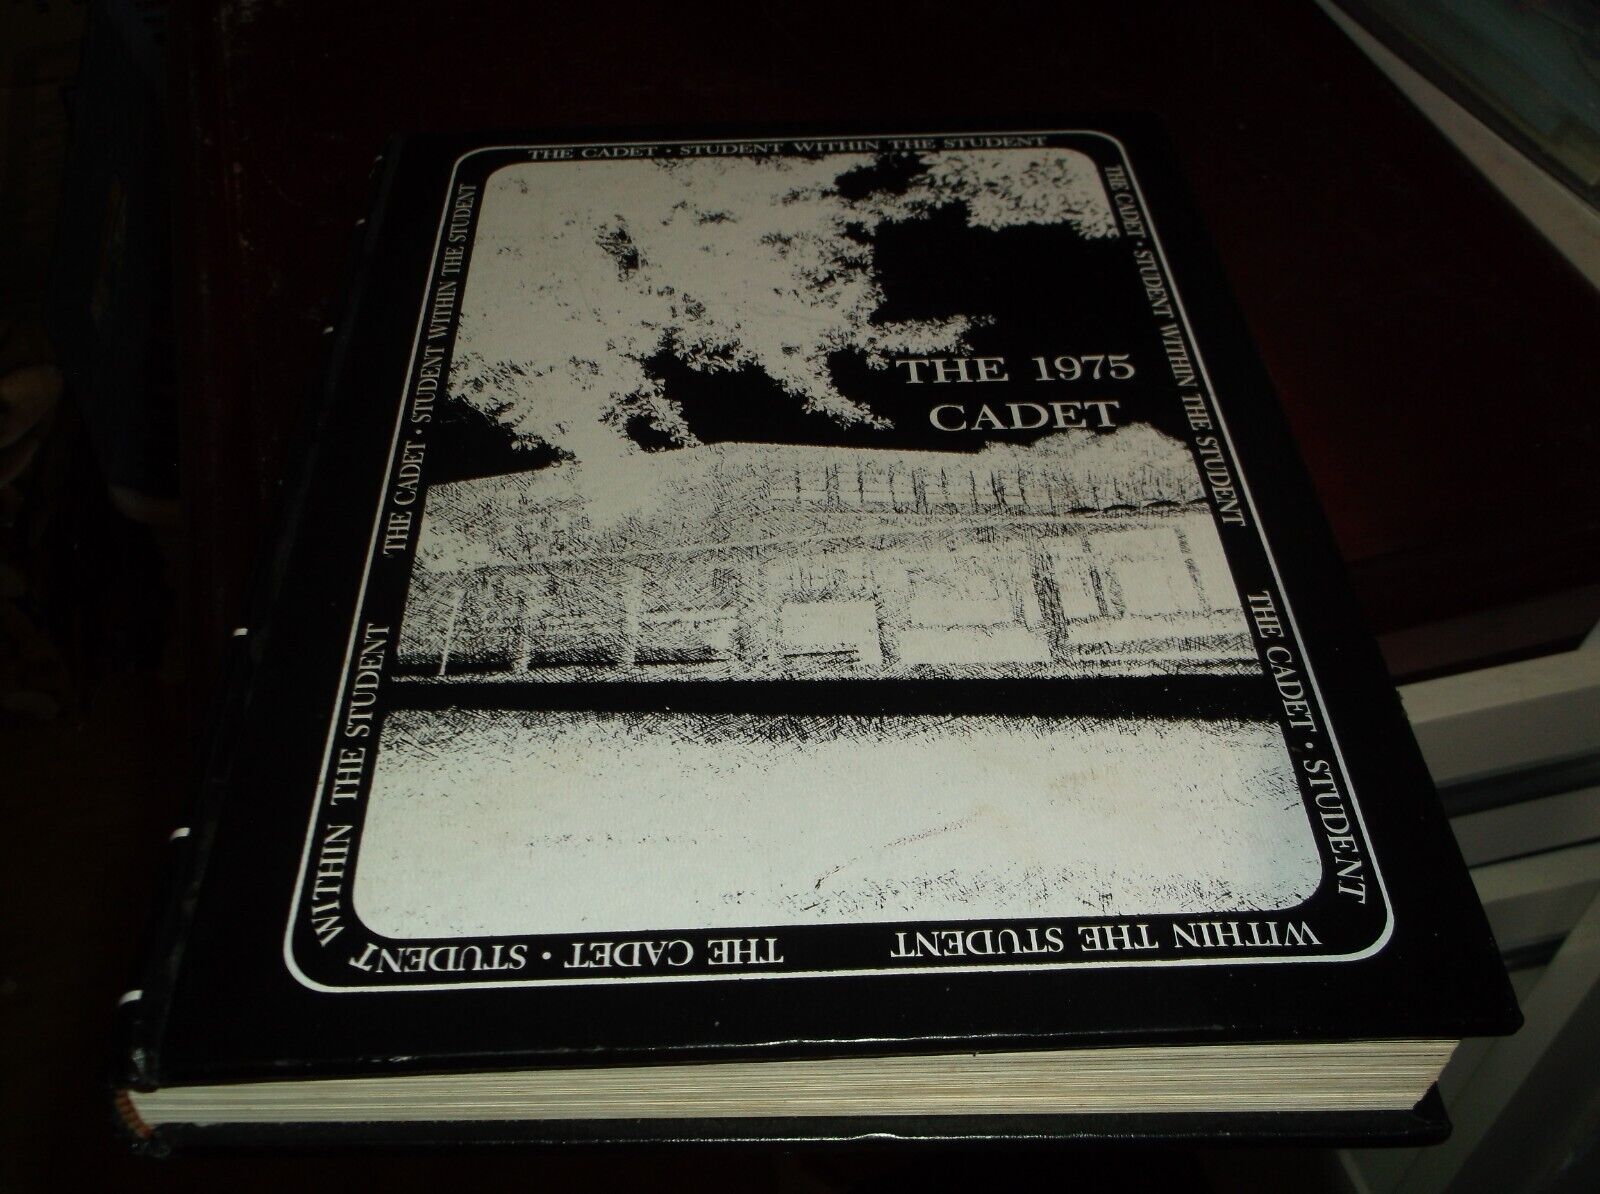 1975  THE CADET - UNIVERSITY MILITARY SCHOOL YEARBOOK,  MOBILE, ALABAMA